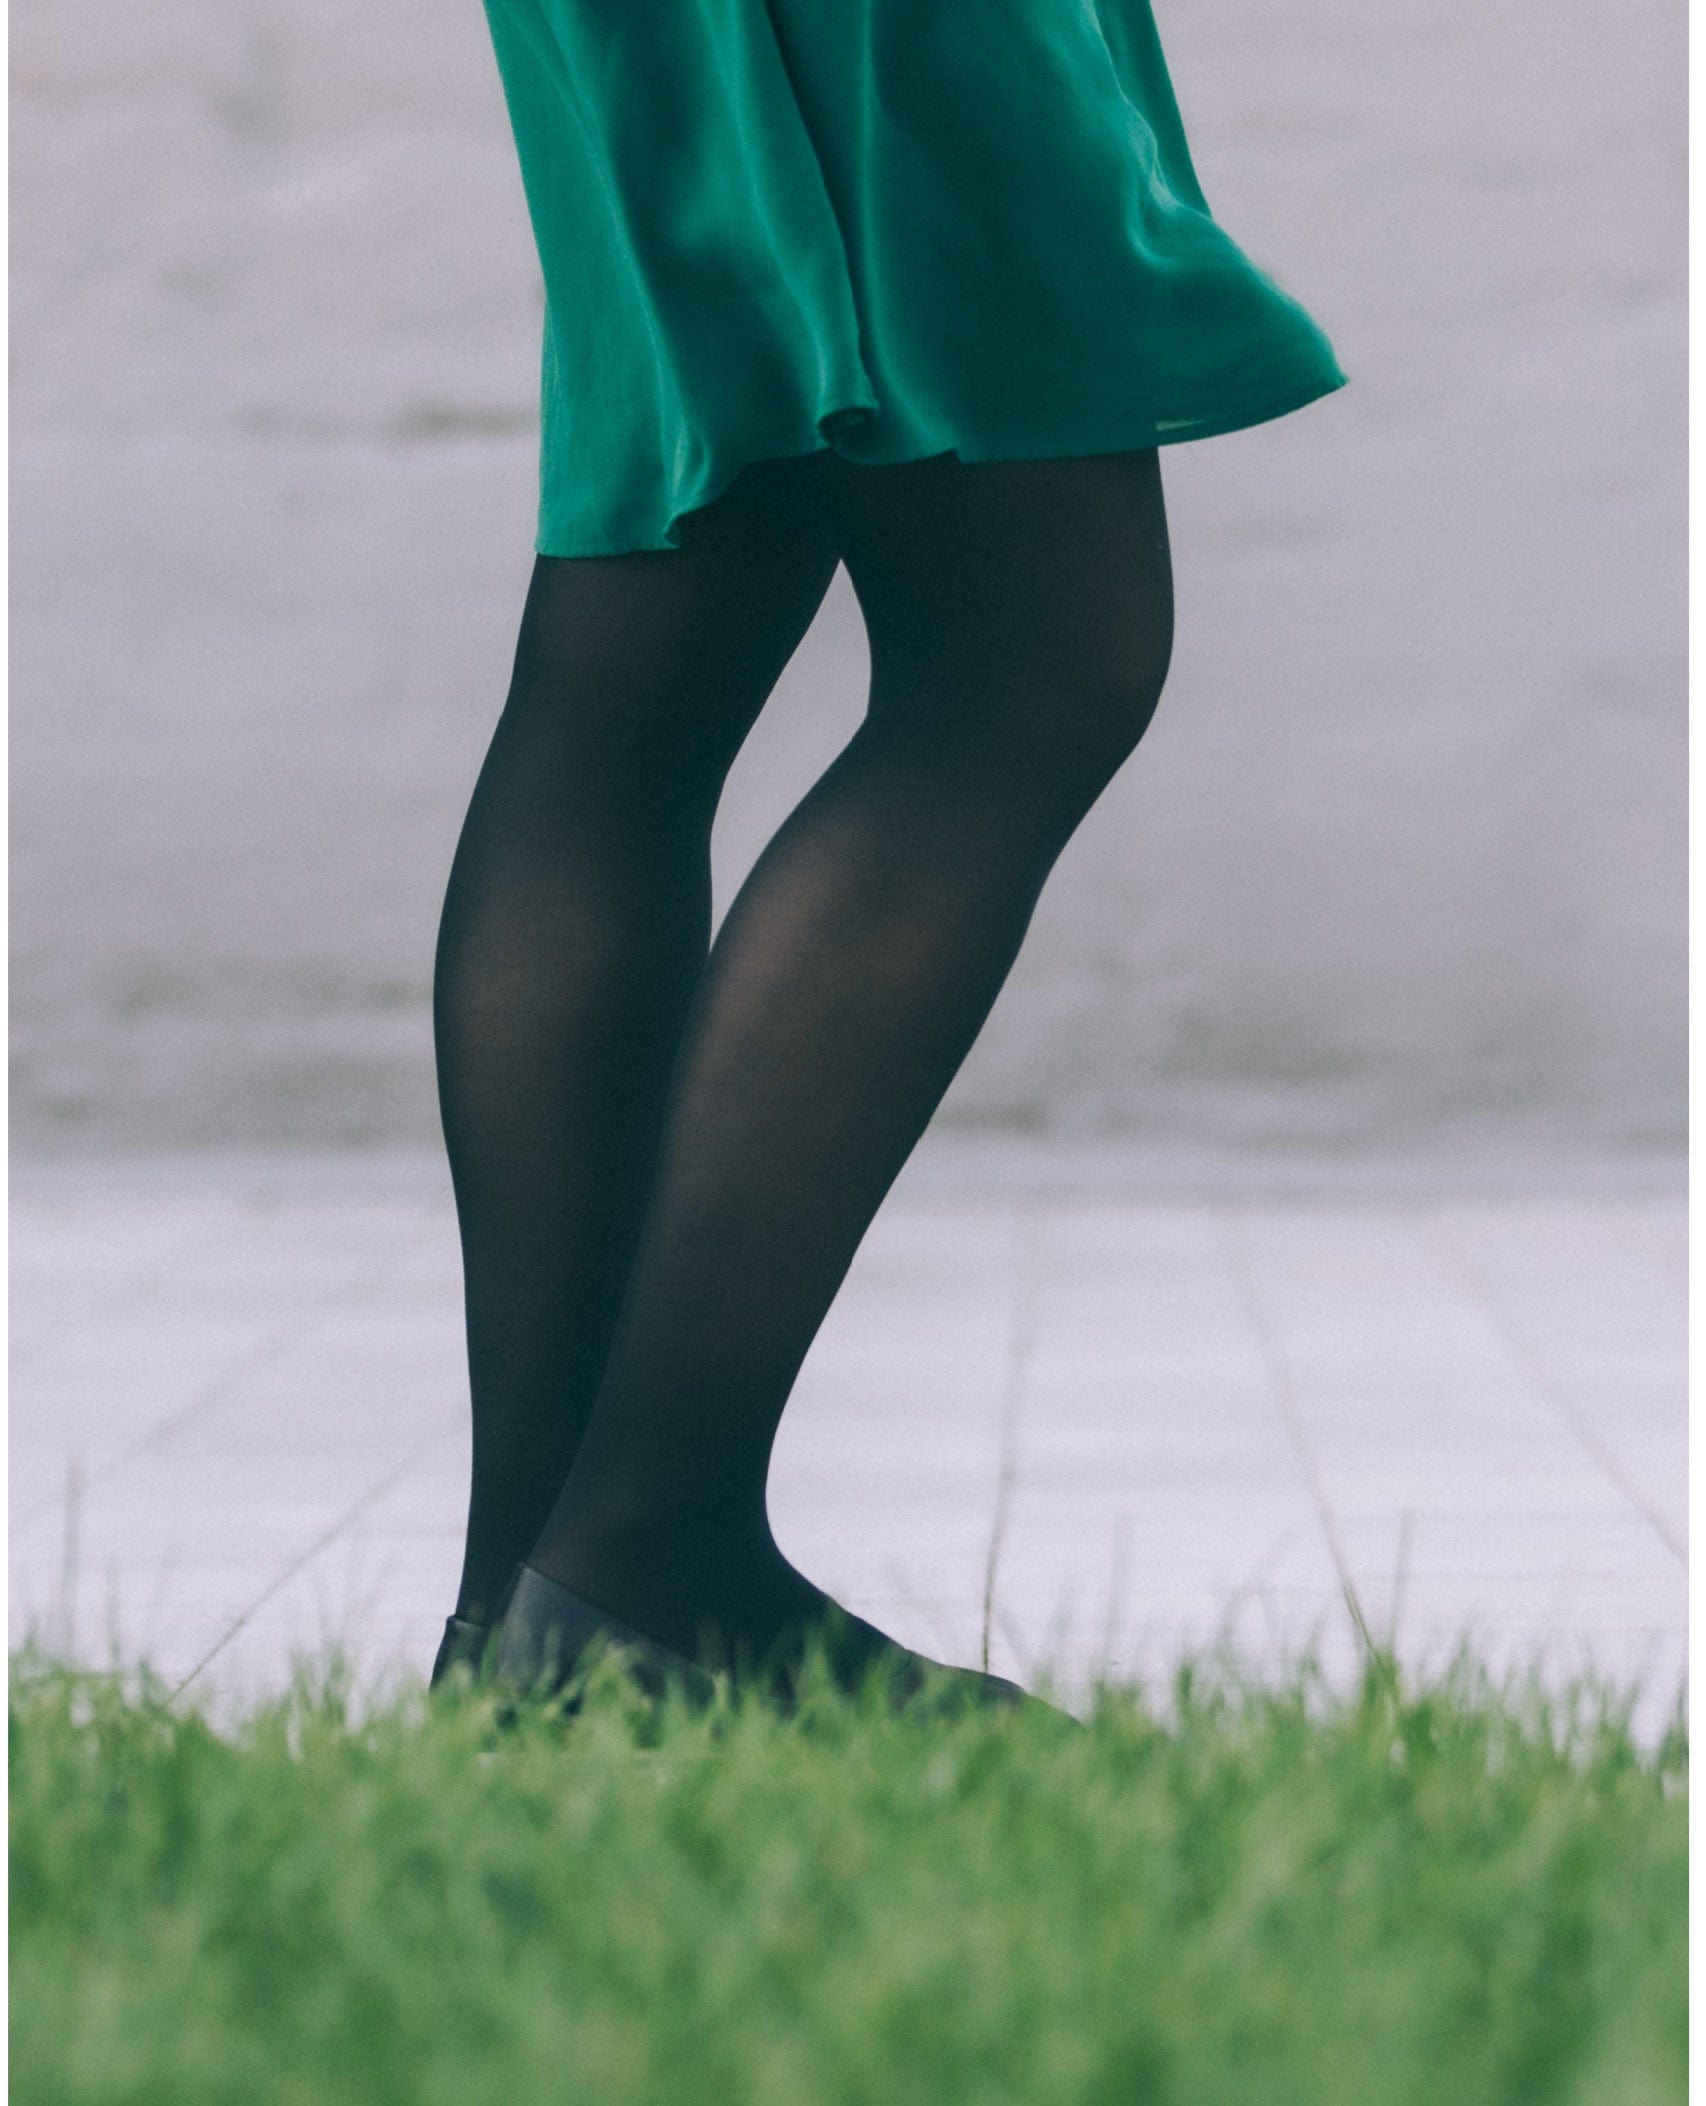 Green by Dim semi-opaque black tights 100% recycled thread 25D